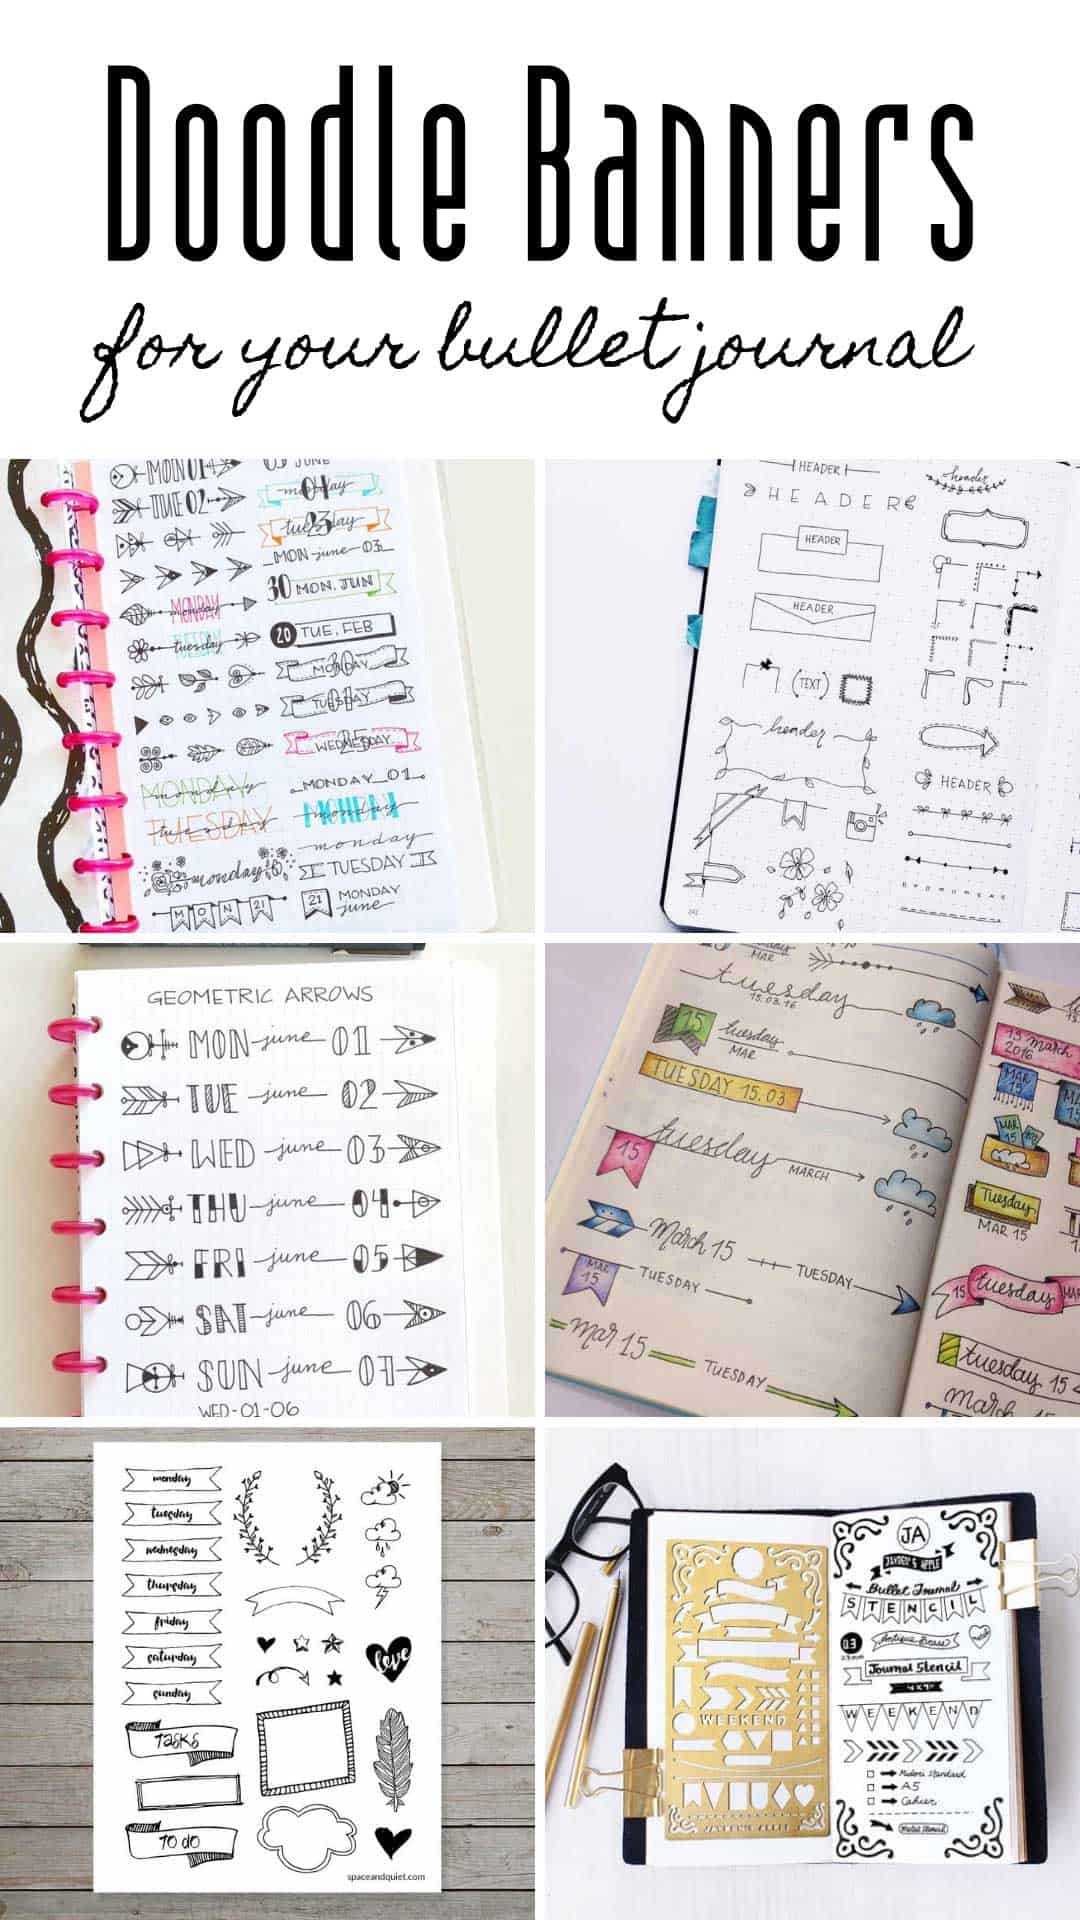 Looking for banners for you bullet journal? We've got some gorgeous ideas and tips on how to draw them! #bulletjournal